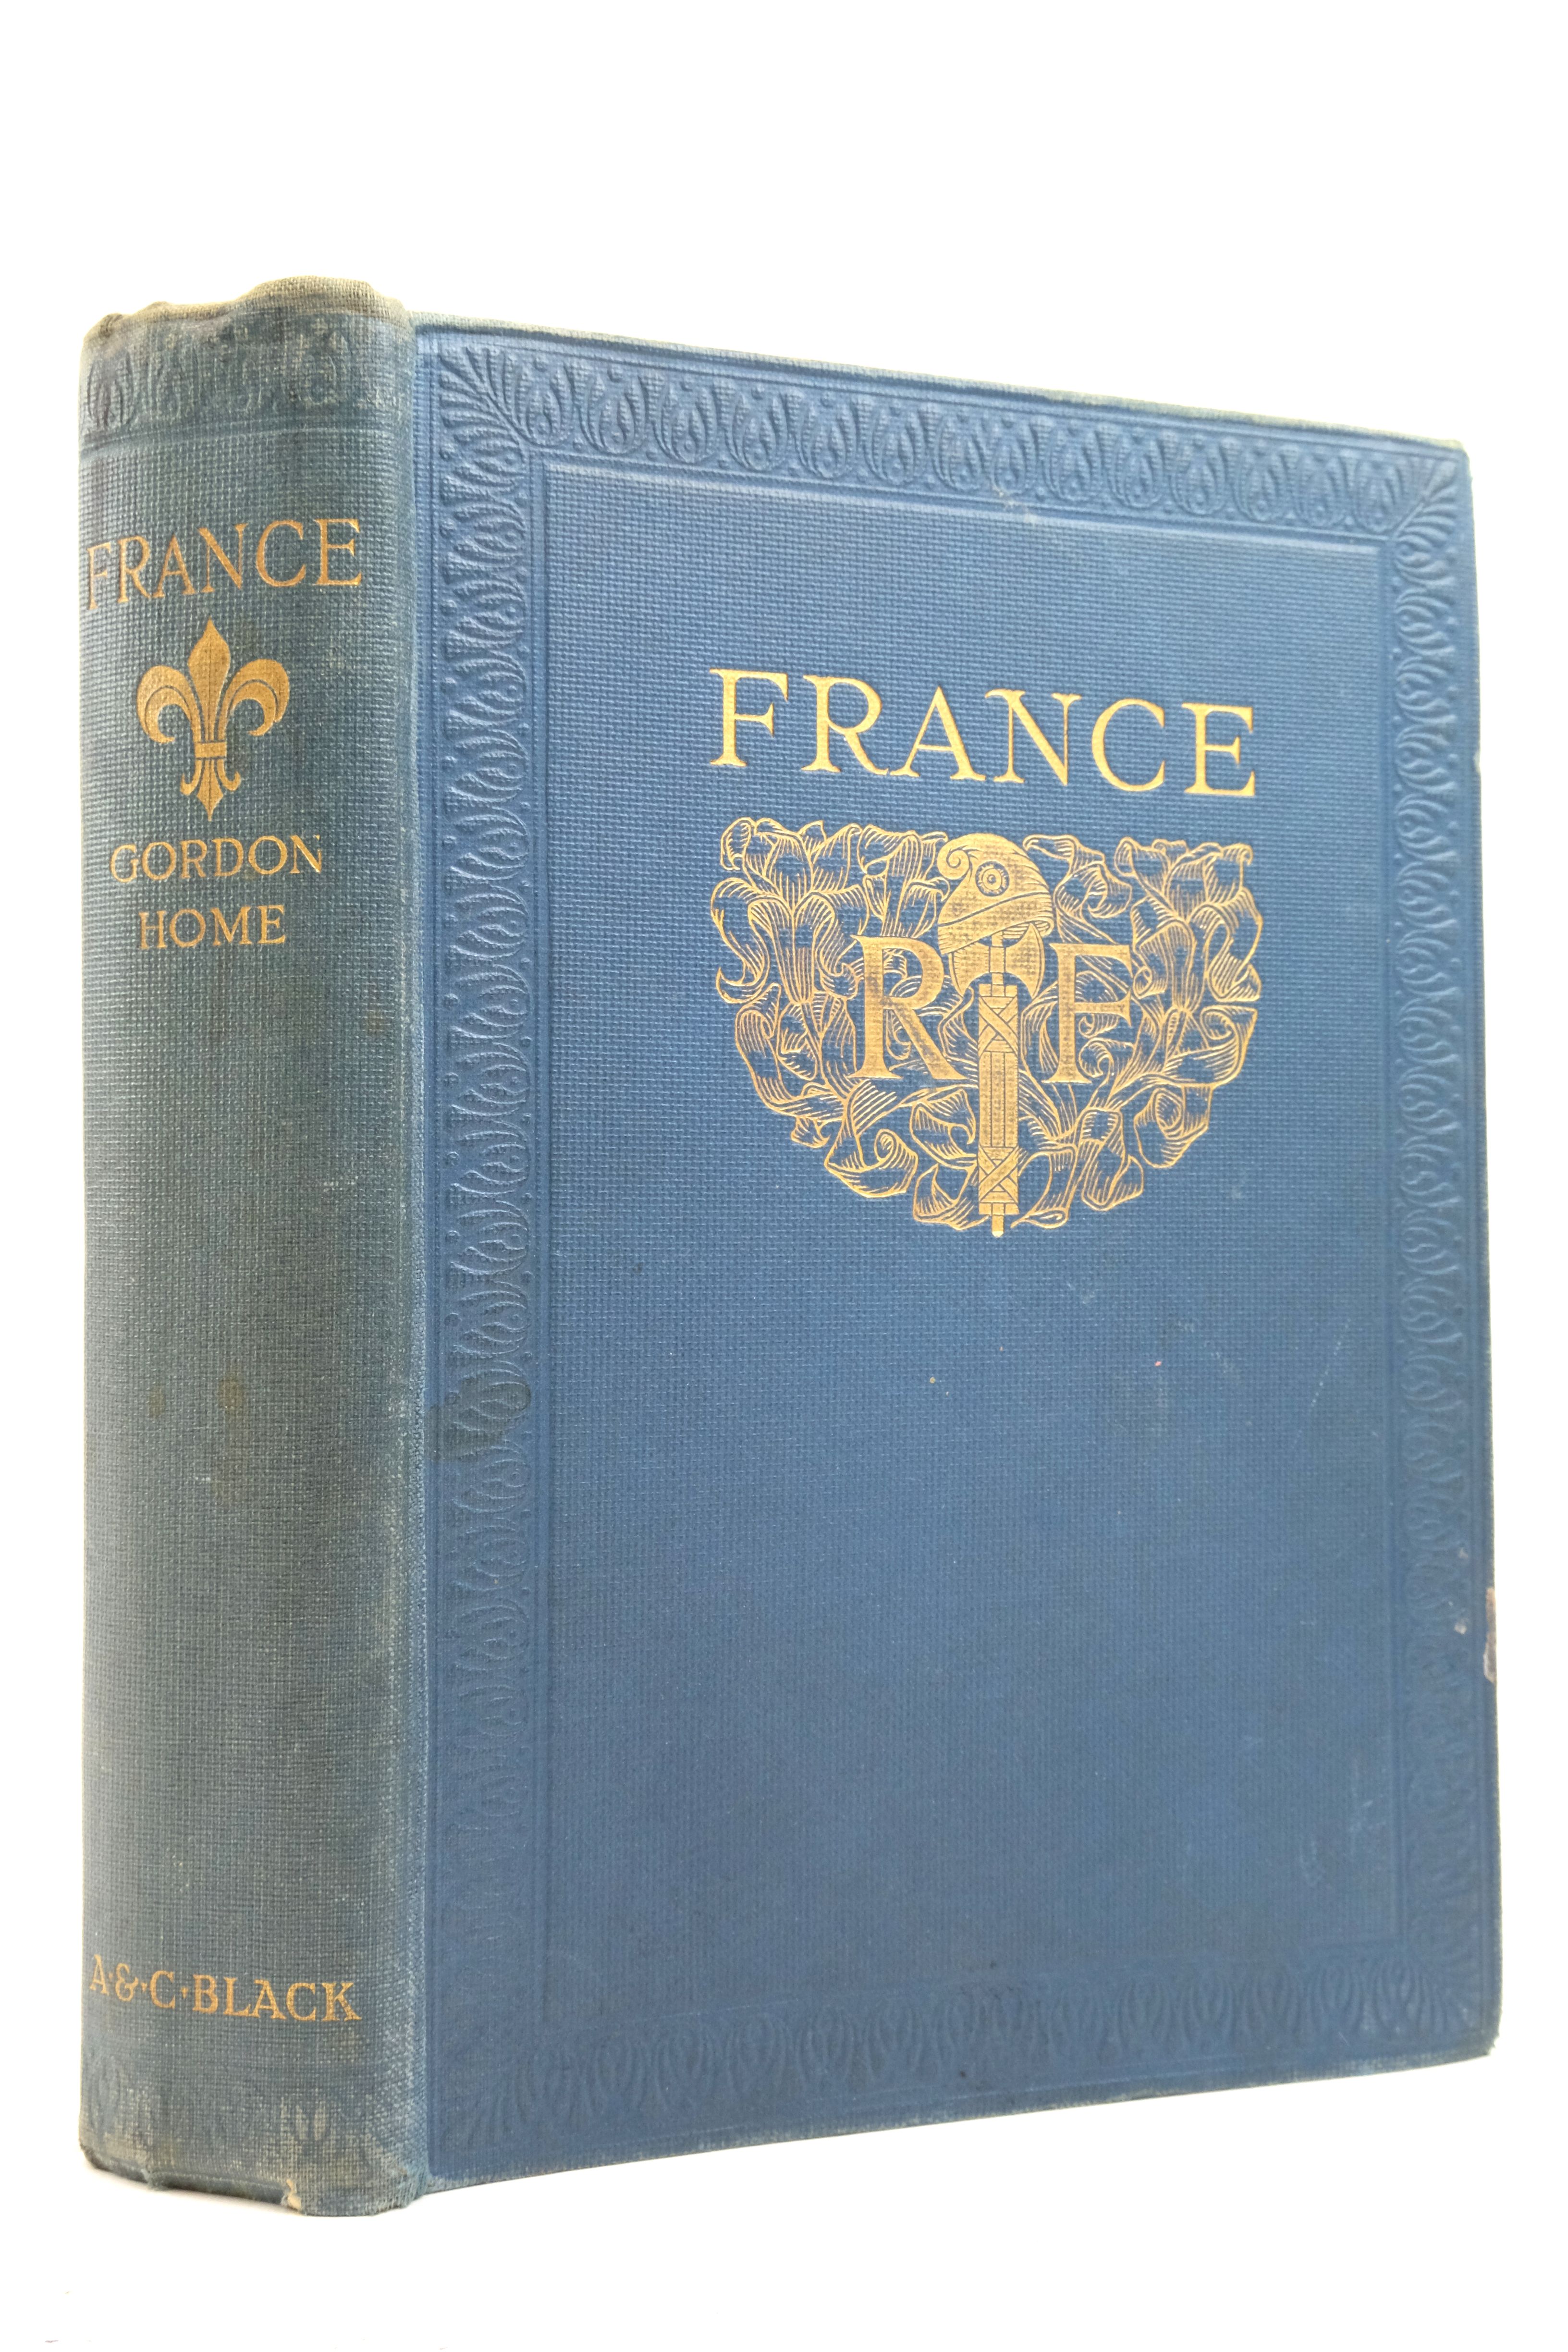 Photo of FRANCE written by Home, Gordon illustrated by Home, Gordon
et al., published by Adam & Charles Black (STOCK CODE: 2137053)  for sale by Stella & Rose's Books